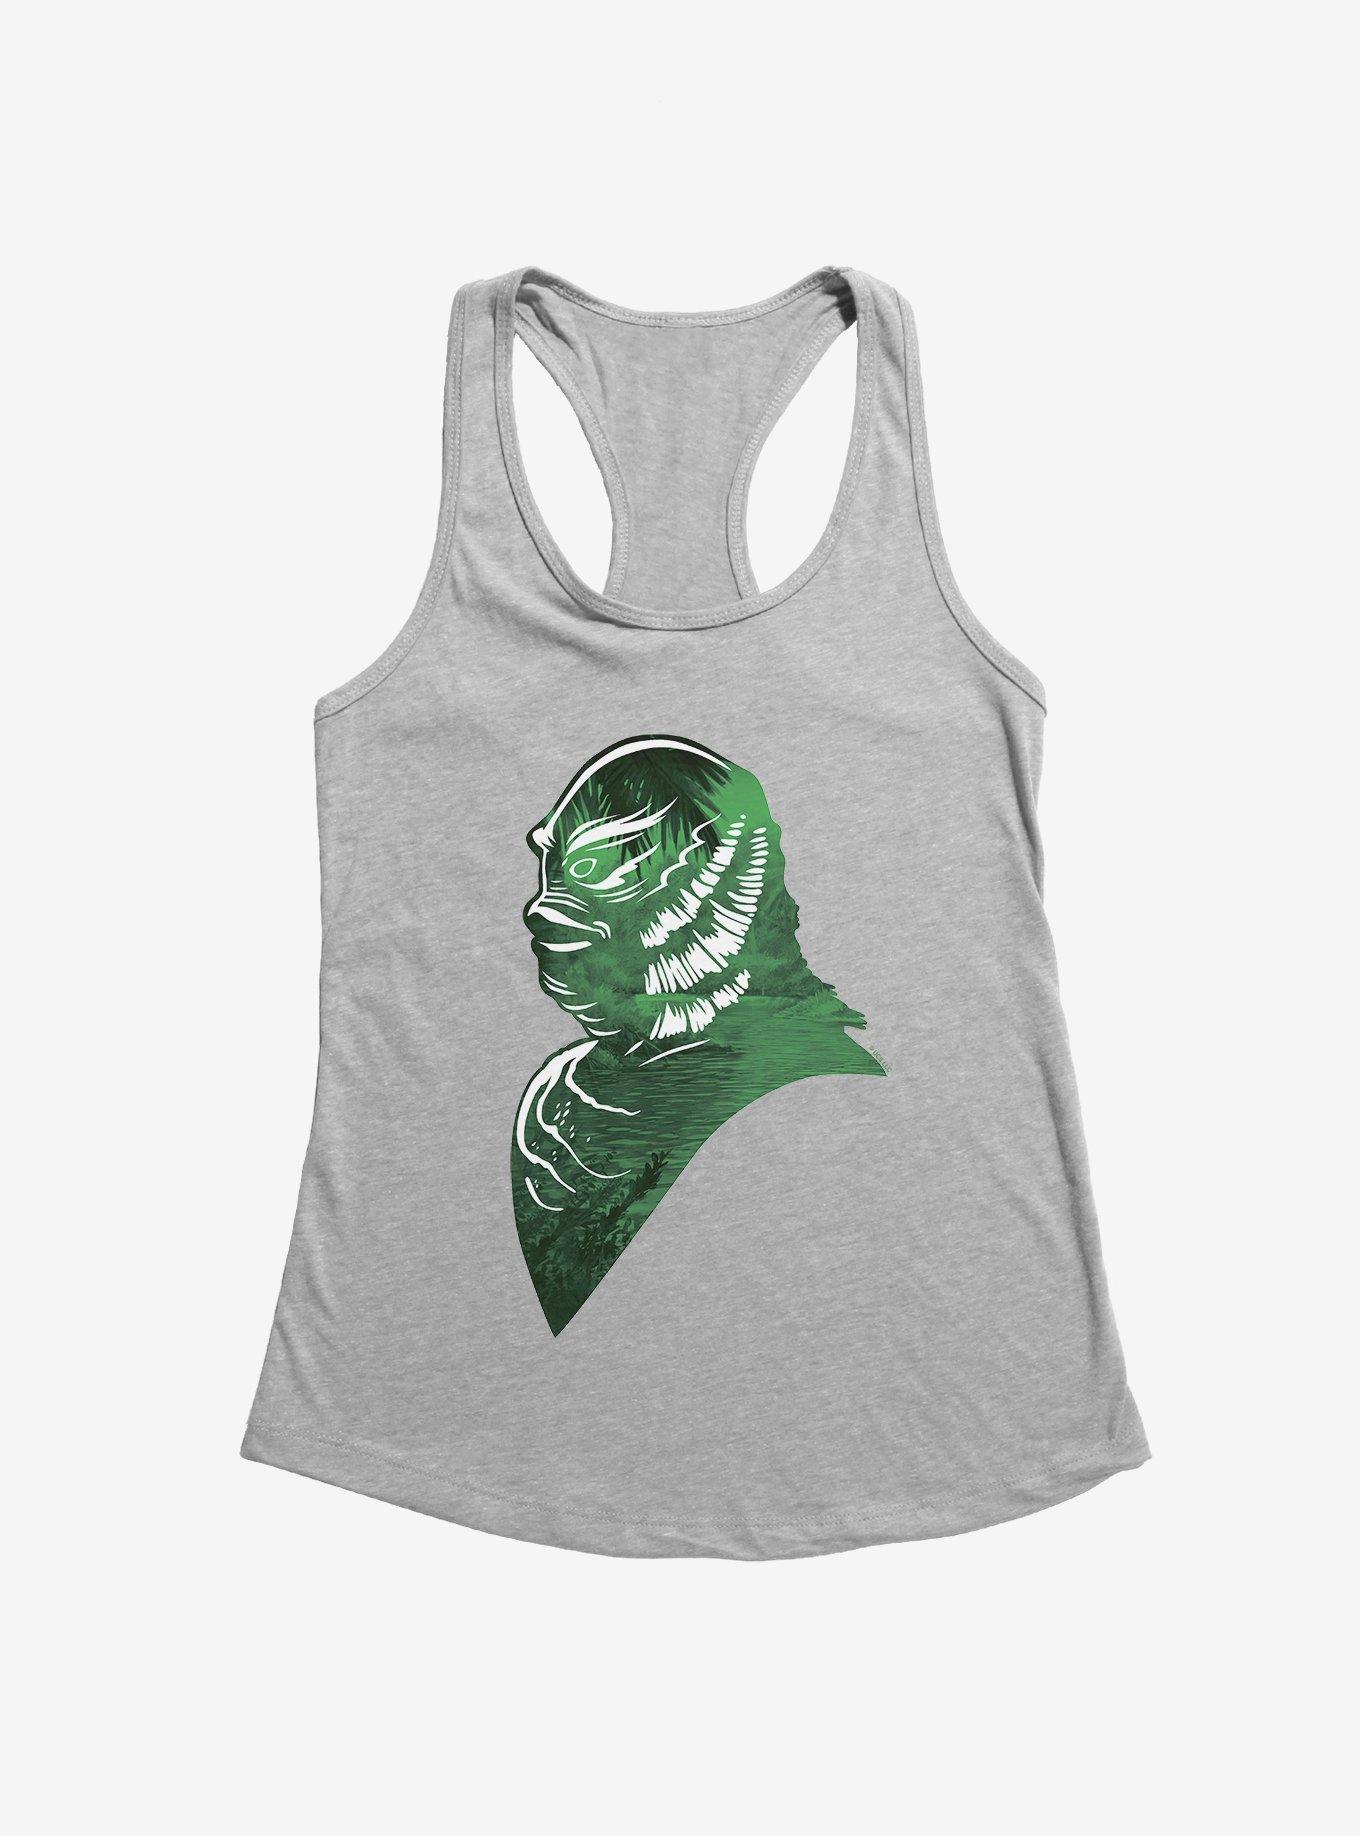 Universal Monsters Creature From The Black Lagoon Amazon Profile Girls Tank, HEATHER, hi-res